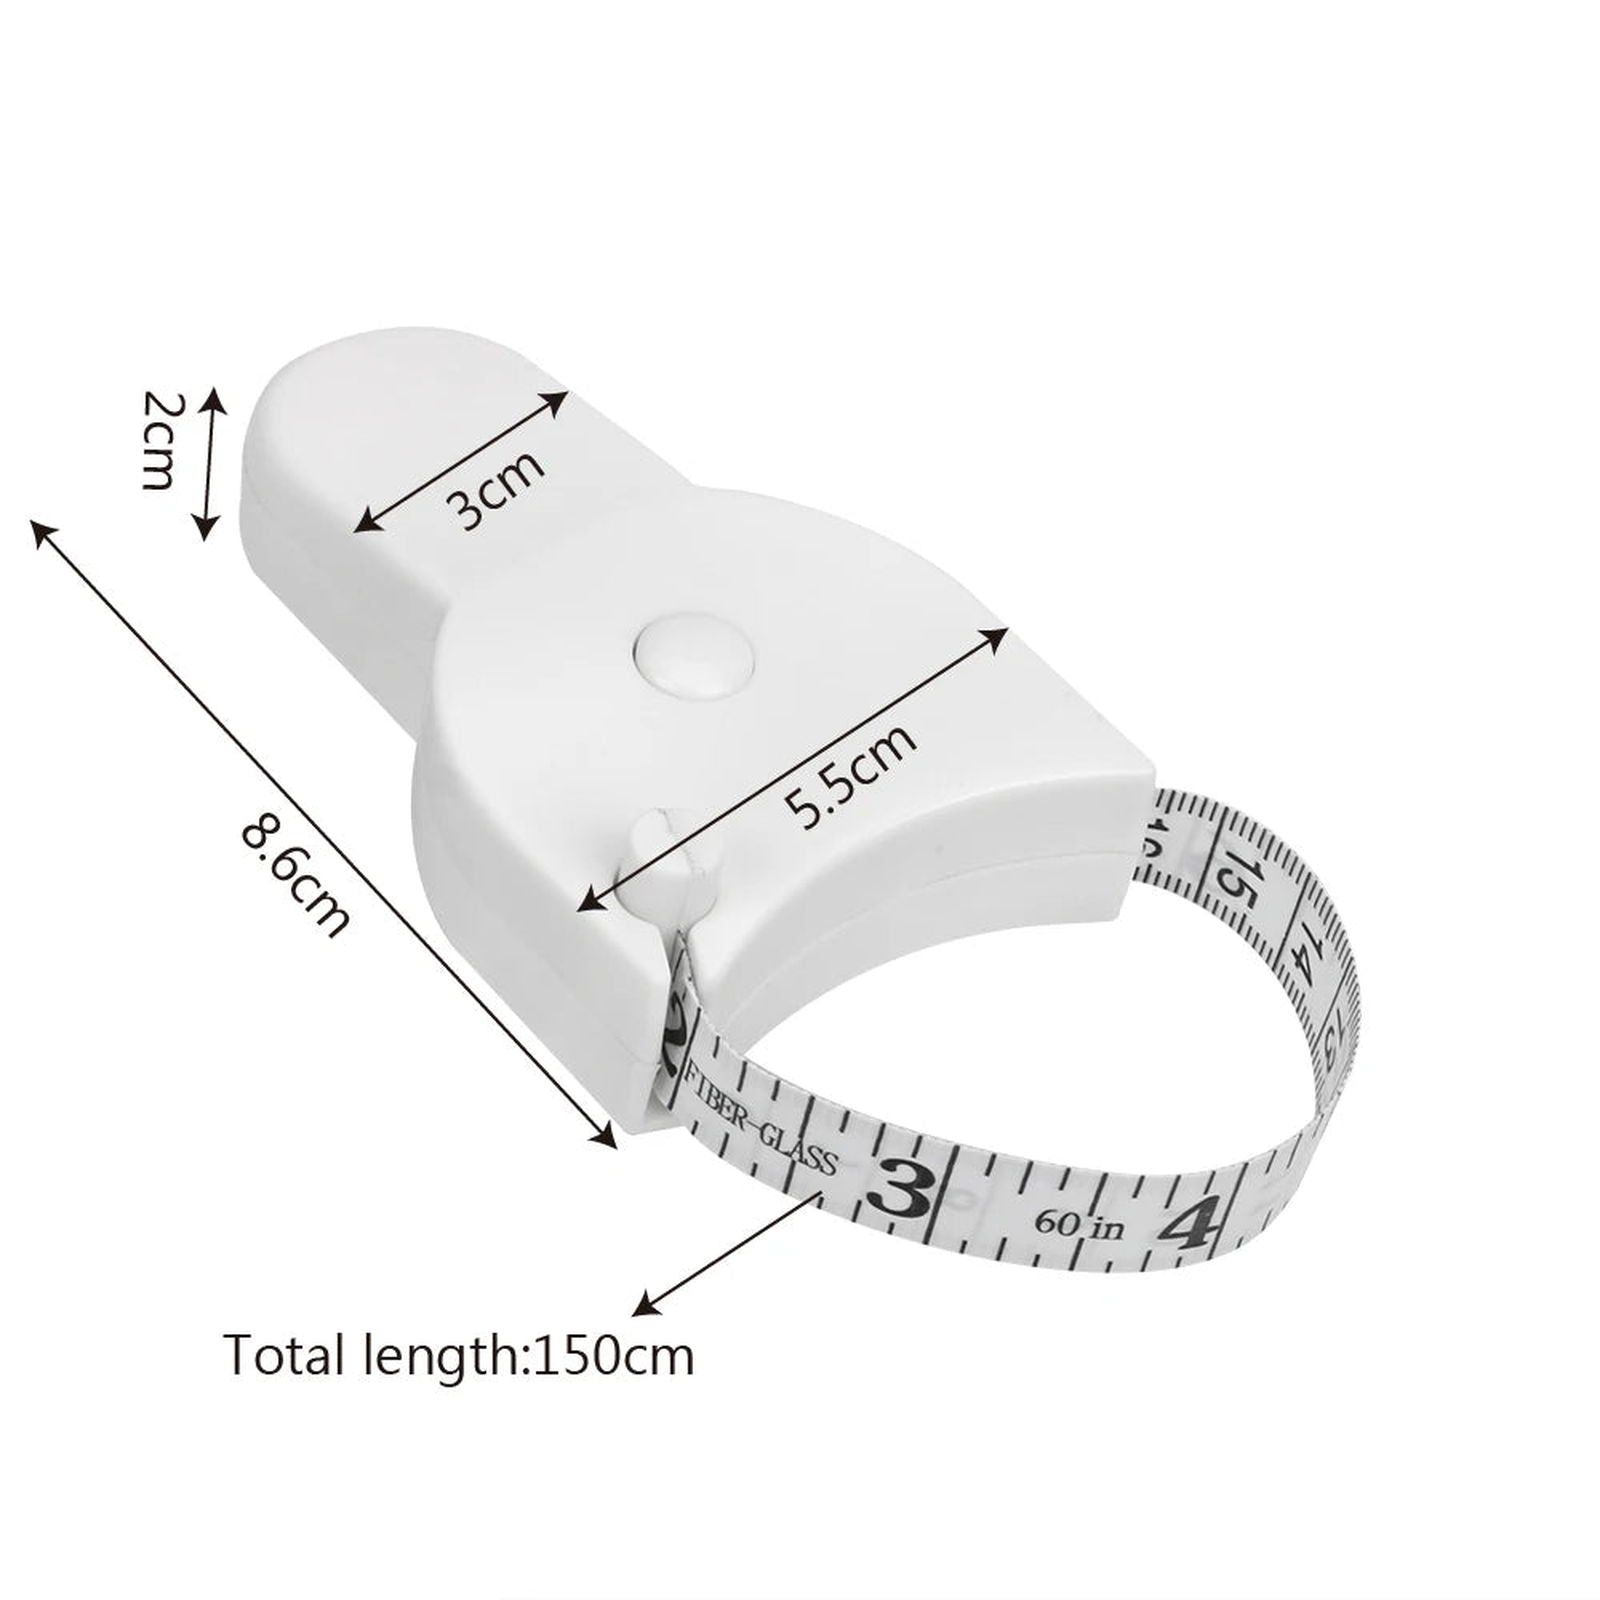 150cm Measuring Tape Caliper For Fitness Accurate Tool Retractable Ruler Body Fat Weight Loss Measure Gauging Tool - ARCHE